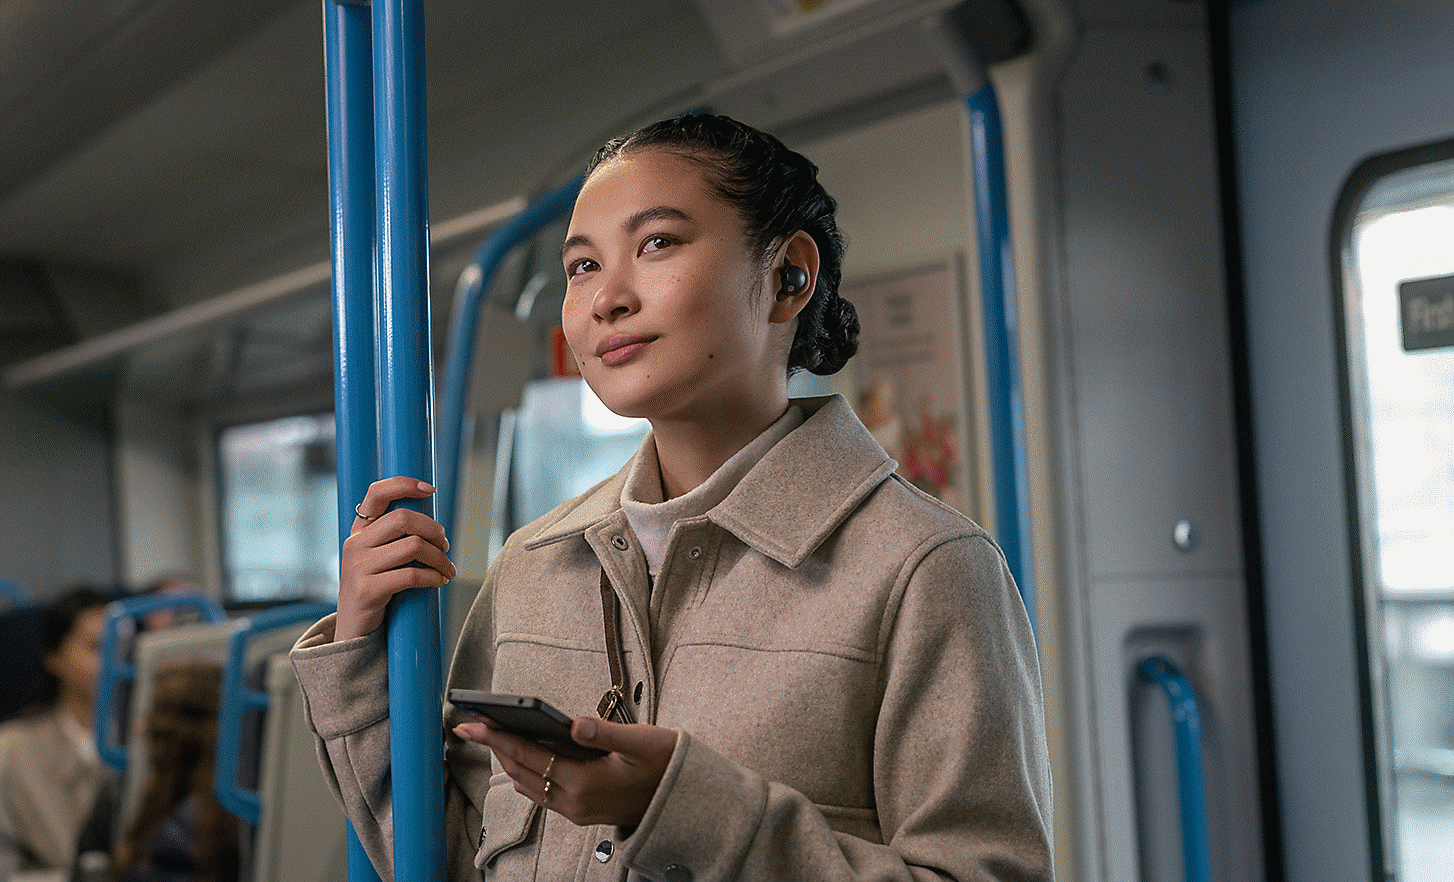 Image of a person in a train wearing the WF-1000XM5 headphones